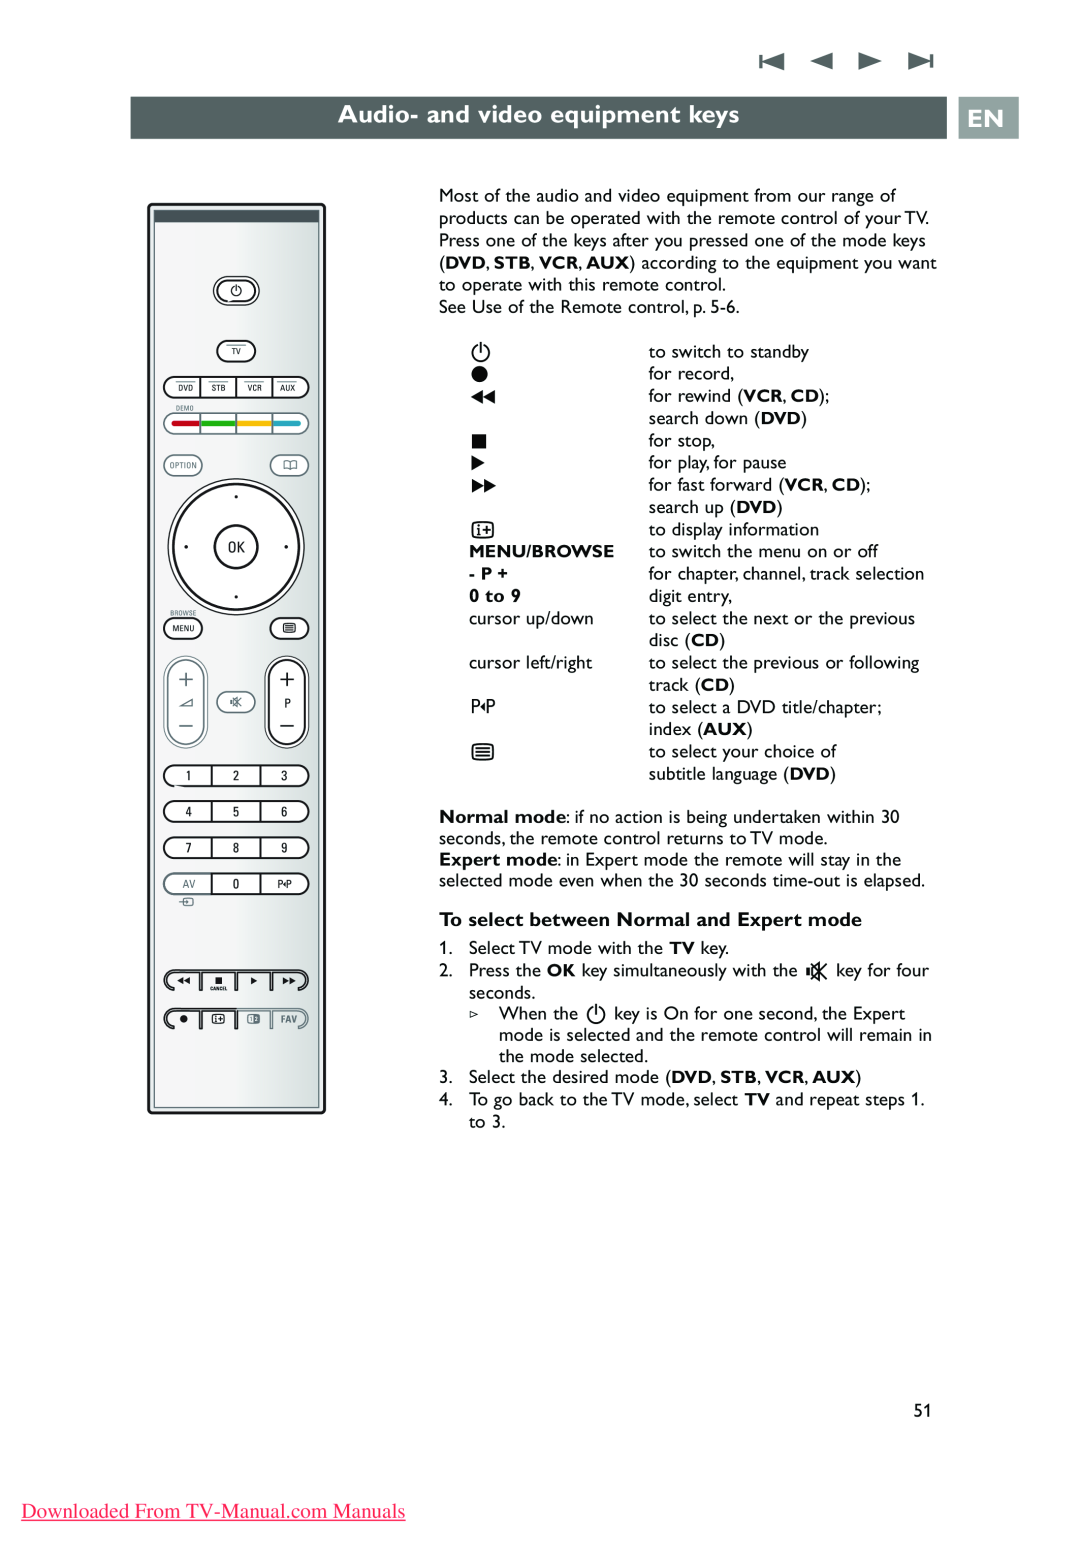 Philips 32PF9631D/10 instruction manual Audio- and video equipment keys, To select between Normal and Expert mode, 0 to 